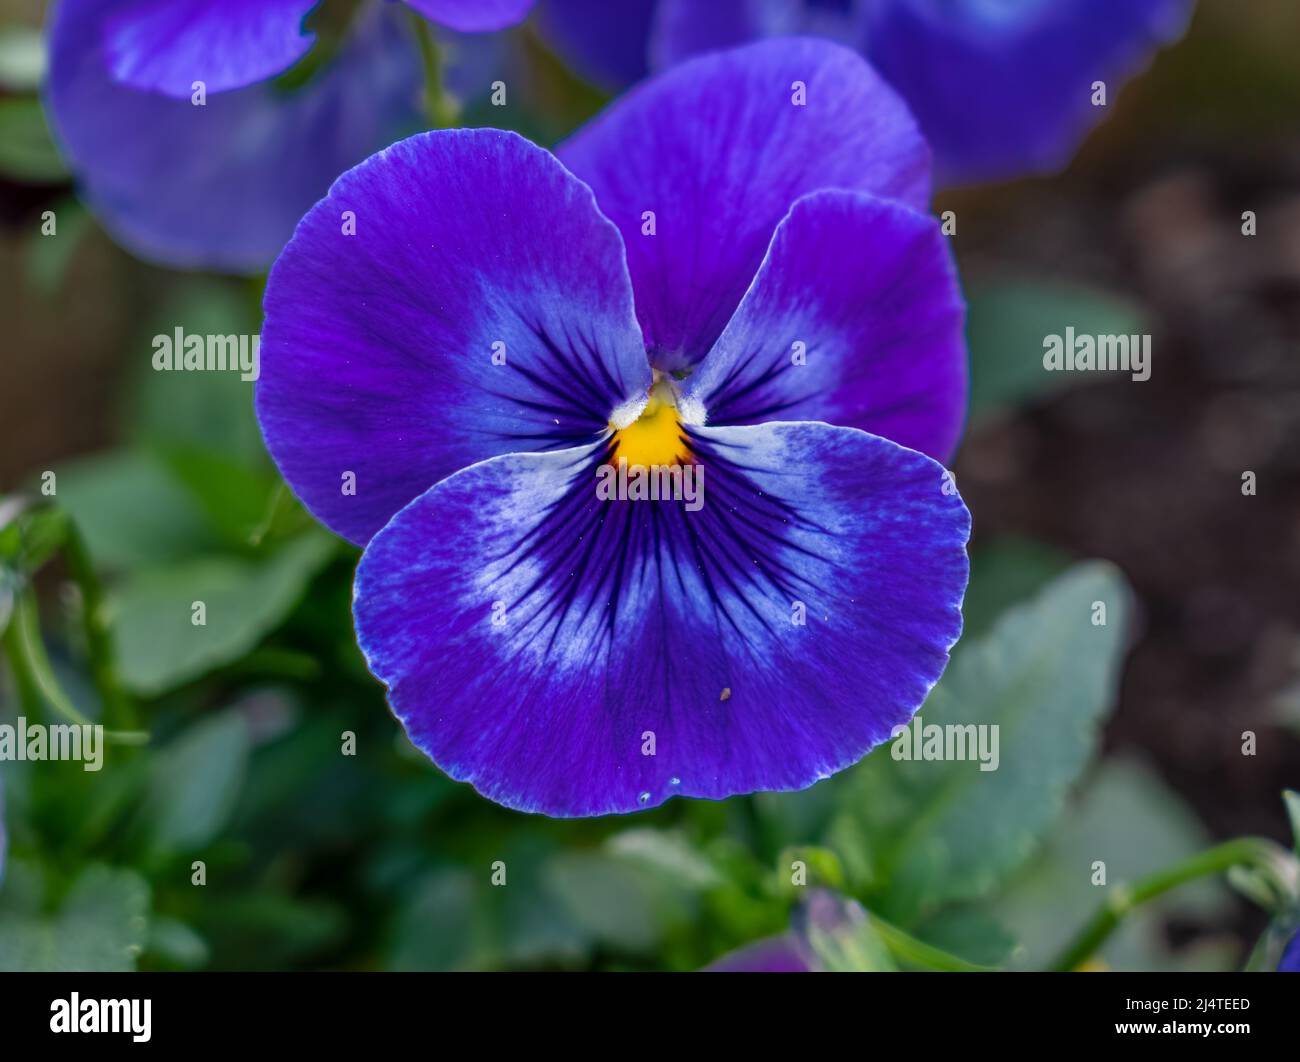 close up of a beautiful spring flowering purple white Pansies (Viola tricolor var. hortensis) Stock Photo